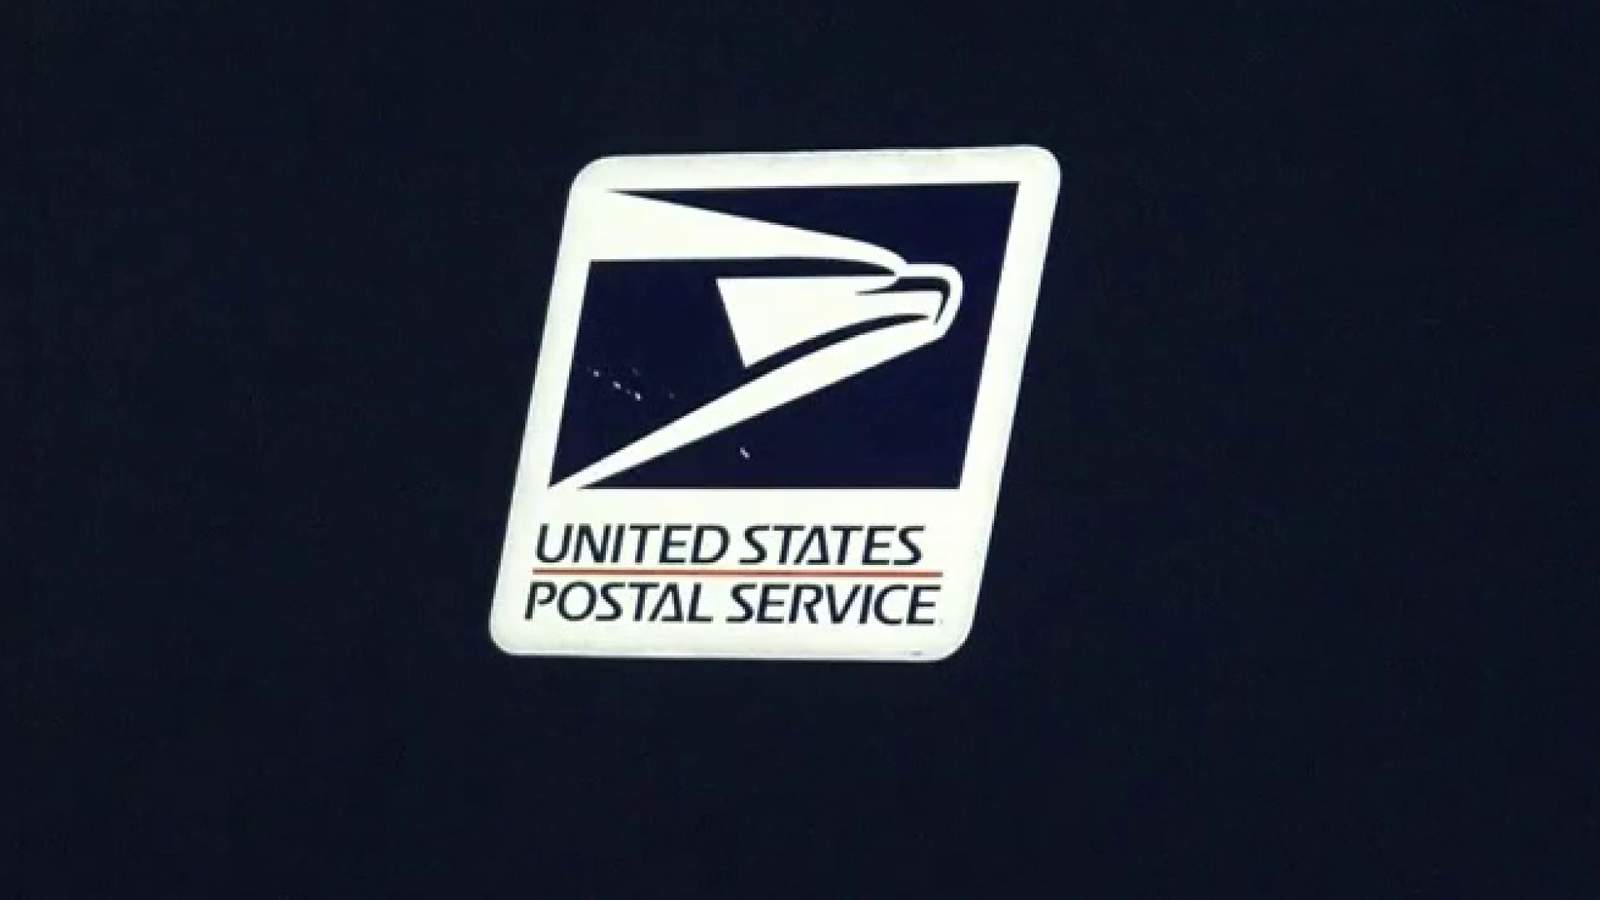 Central Florida union rep for postal workers is concerned about proposed changes